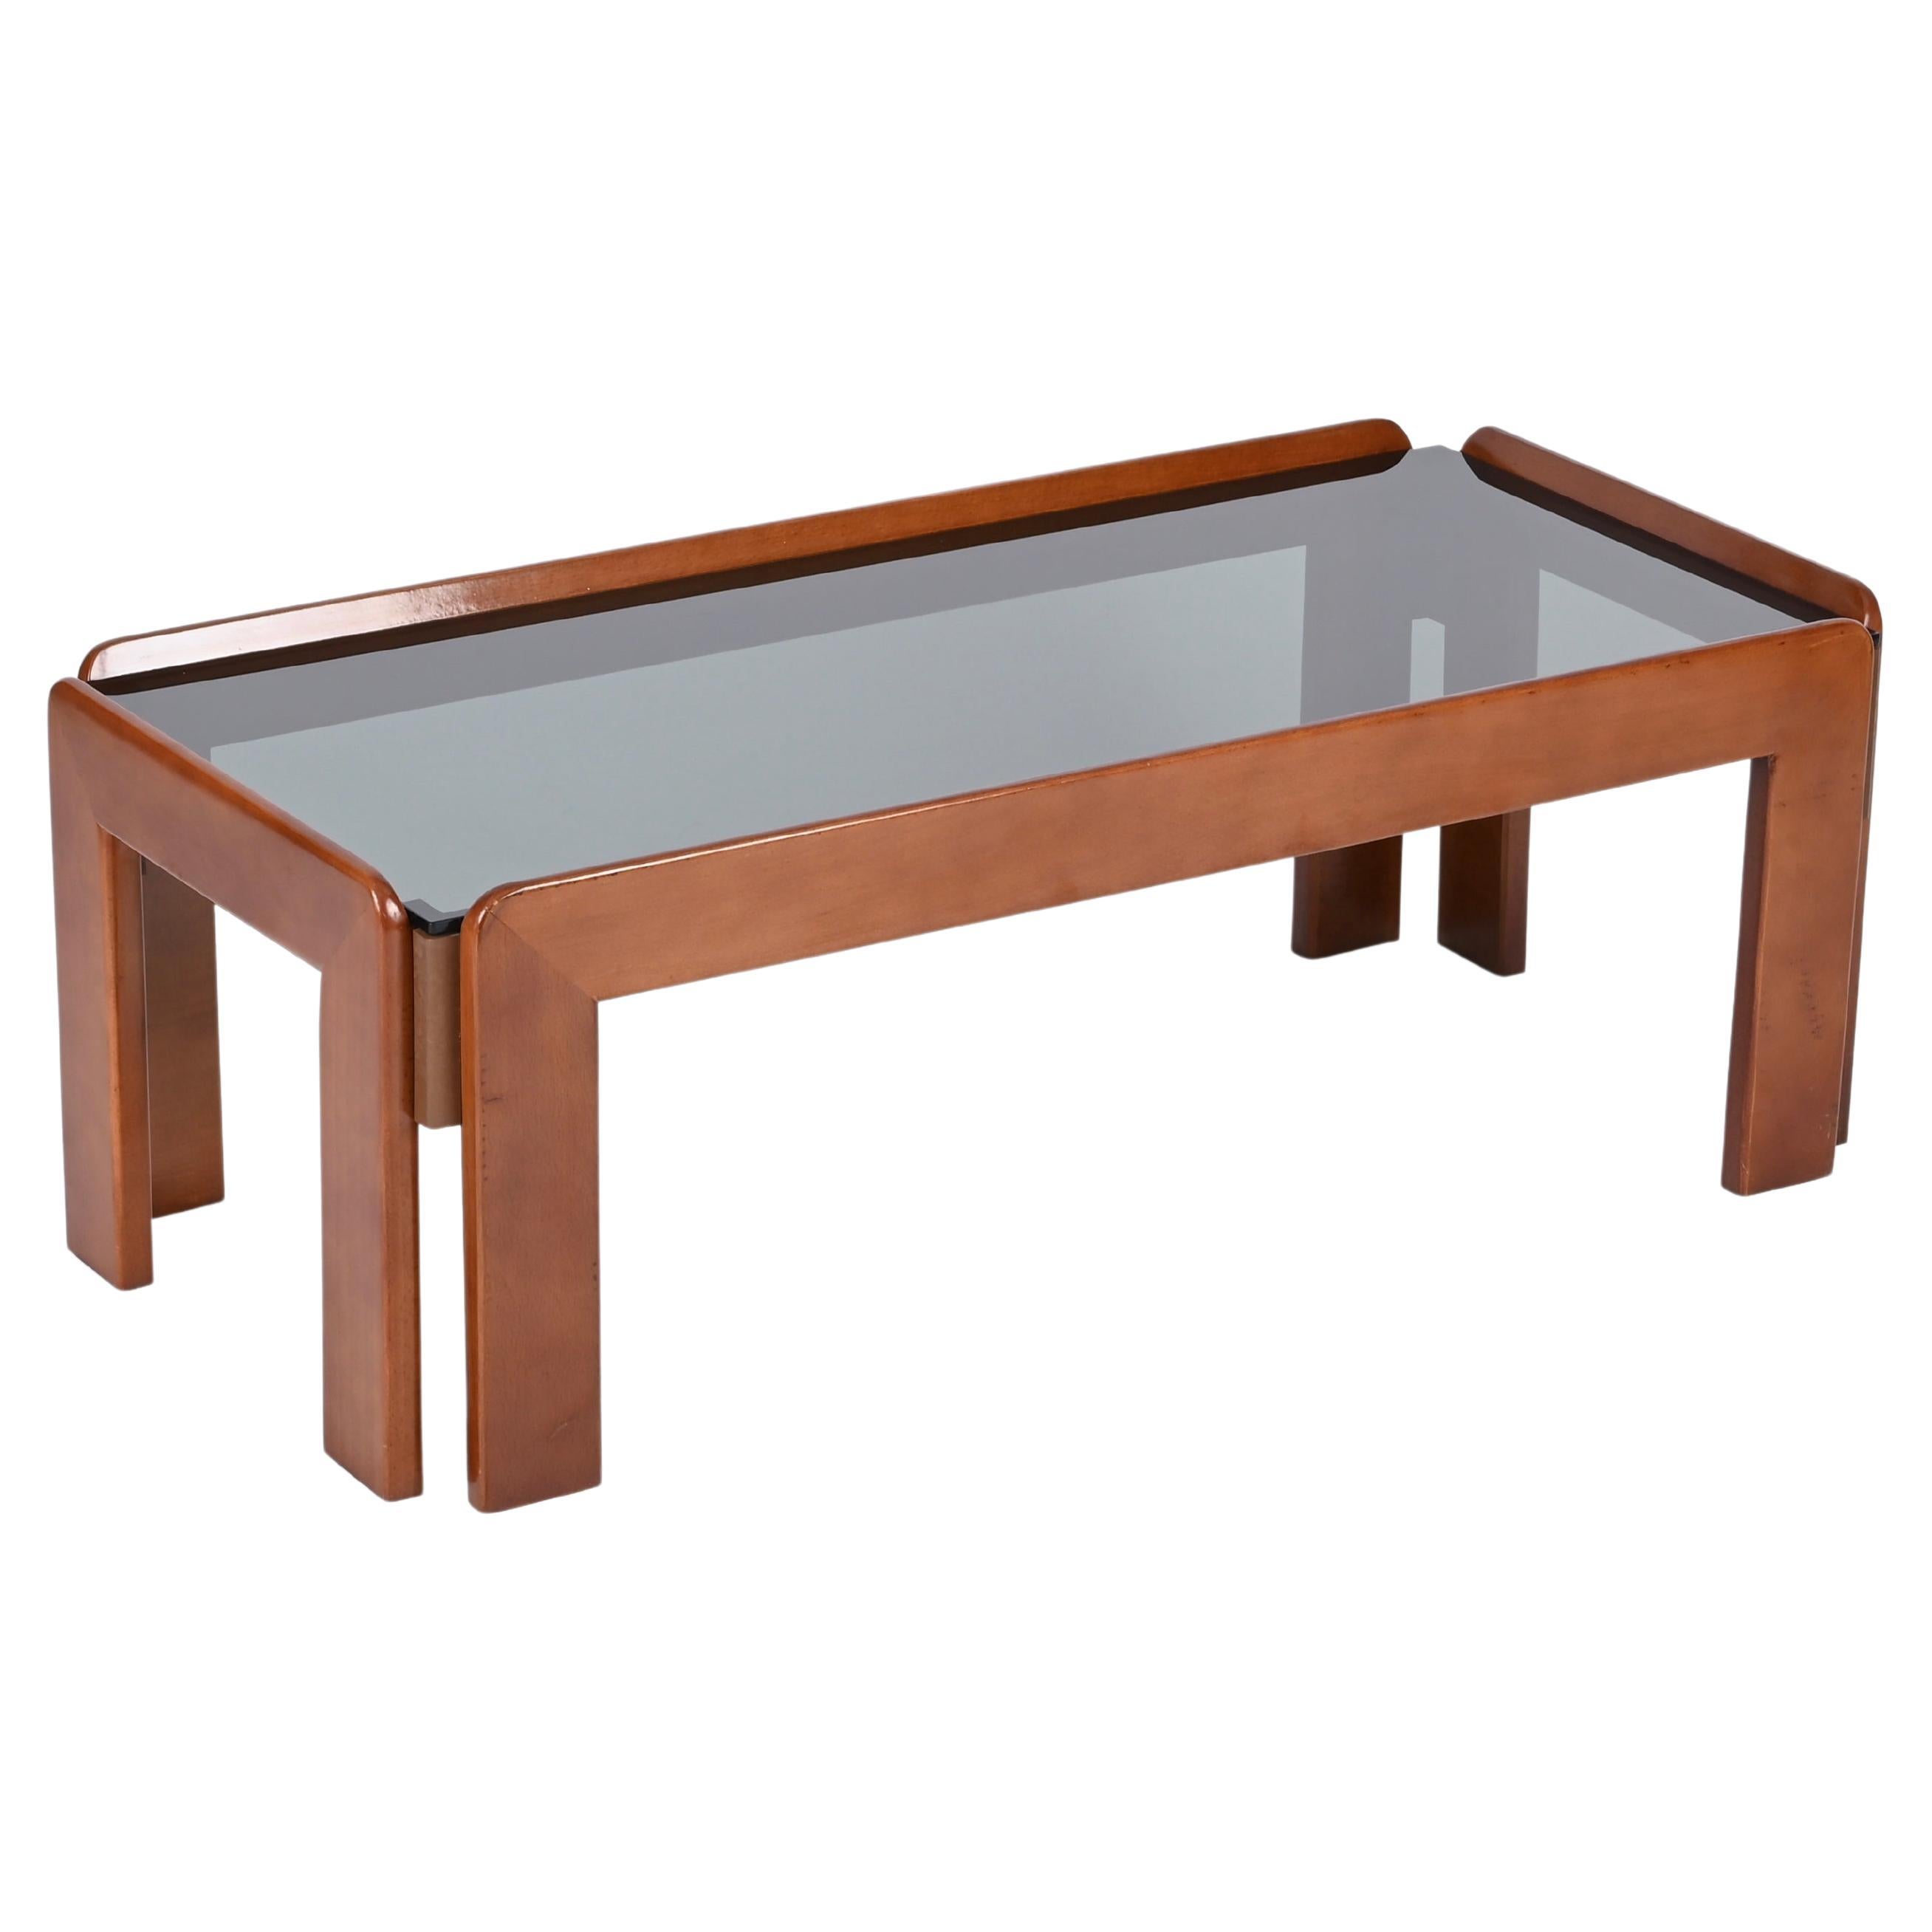 Tobia Scarpa Rectangular Walnut Coffee Table with Smoked Glass, Italy 1960s For Sale